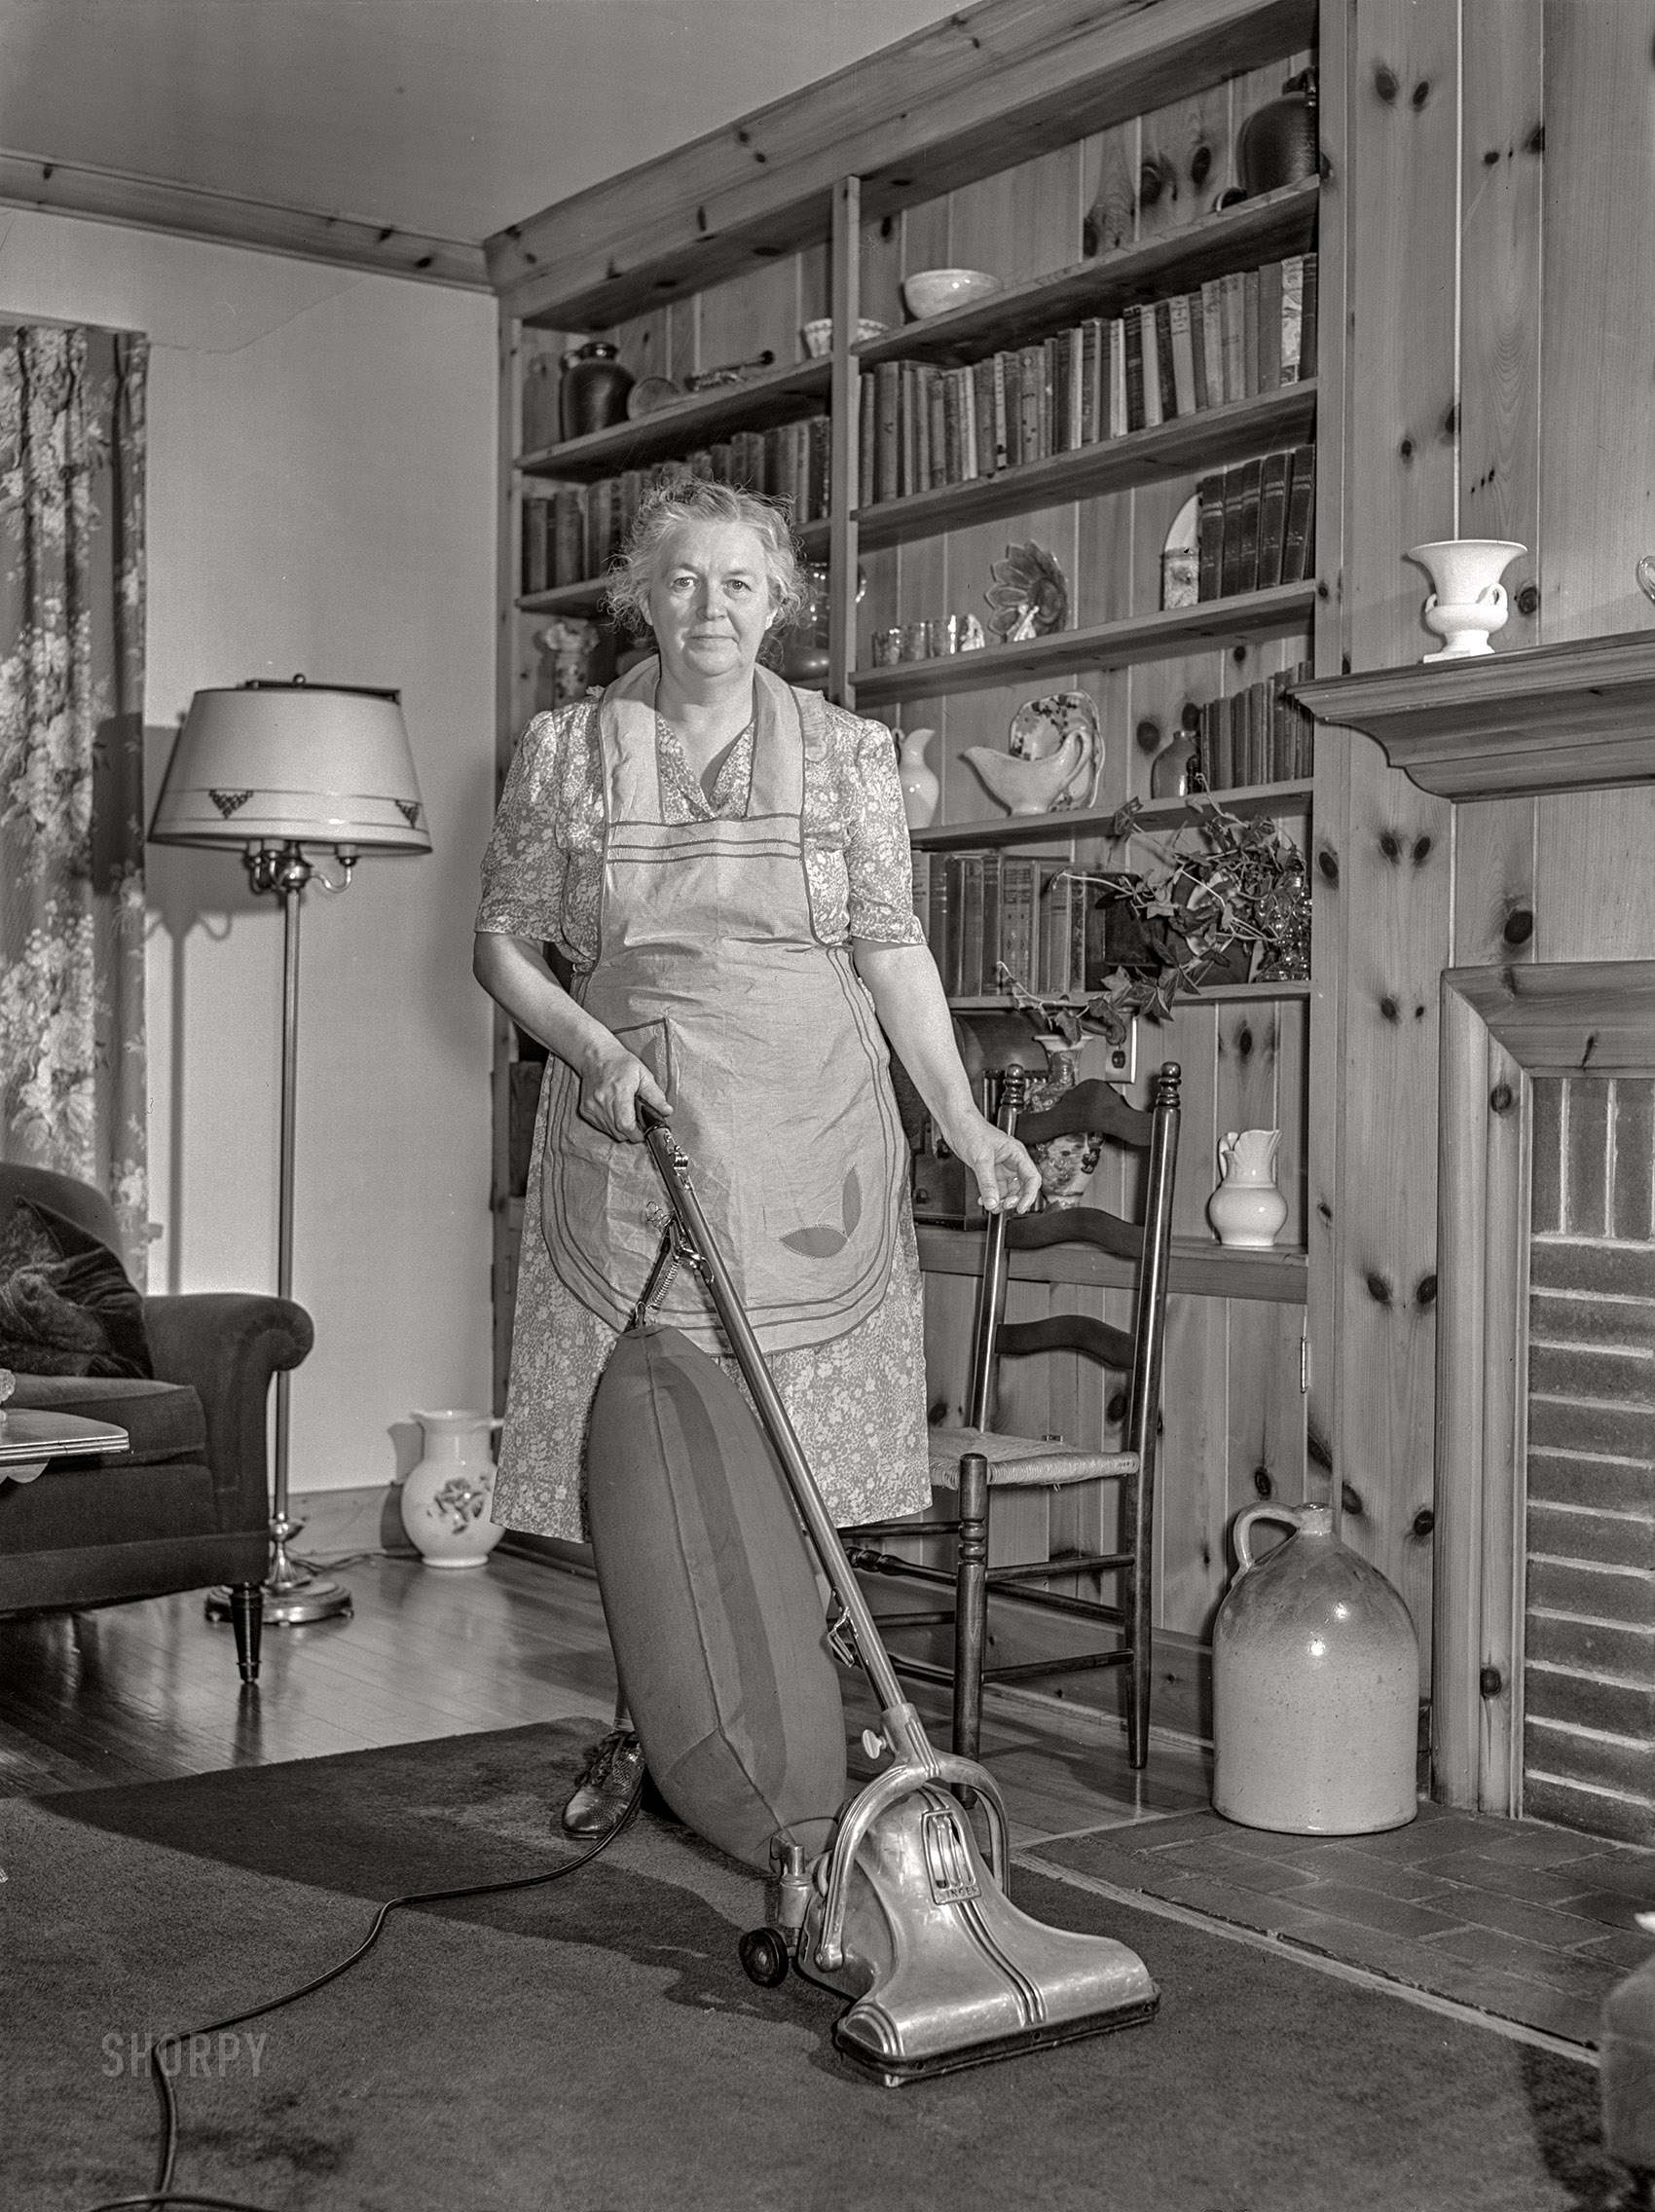 June 1942. "Knox County, Tennessee. Electrification of farms made possible by the Tennessee Valley Authority. Mrs. Wiegel, farm wife, uses electric vacuum cleaner." Acetate negative by Arthur Rothstein for the U.S. Foreign Information Service. View full size.